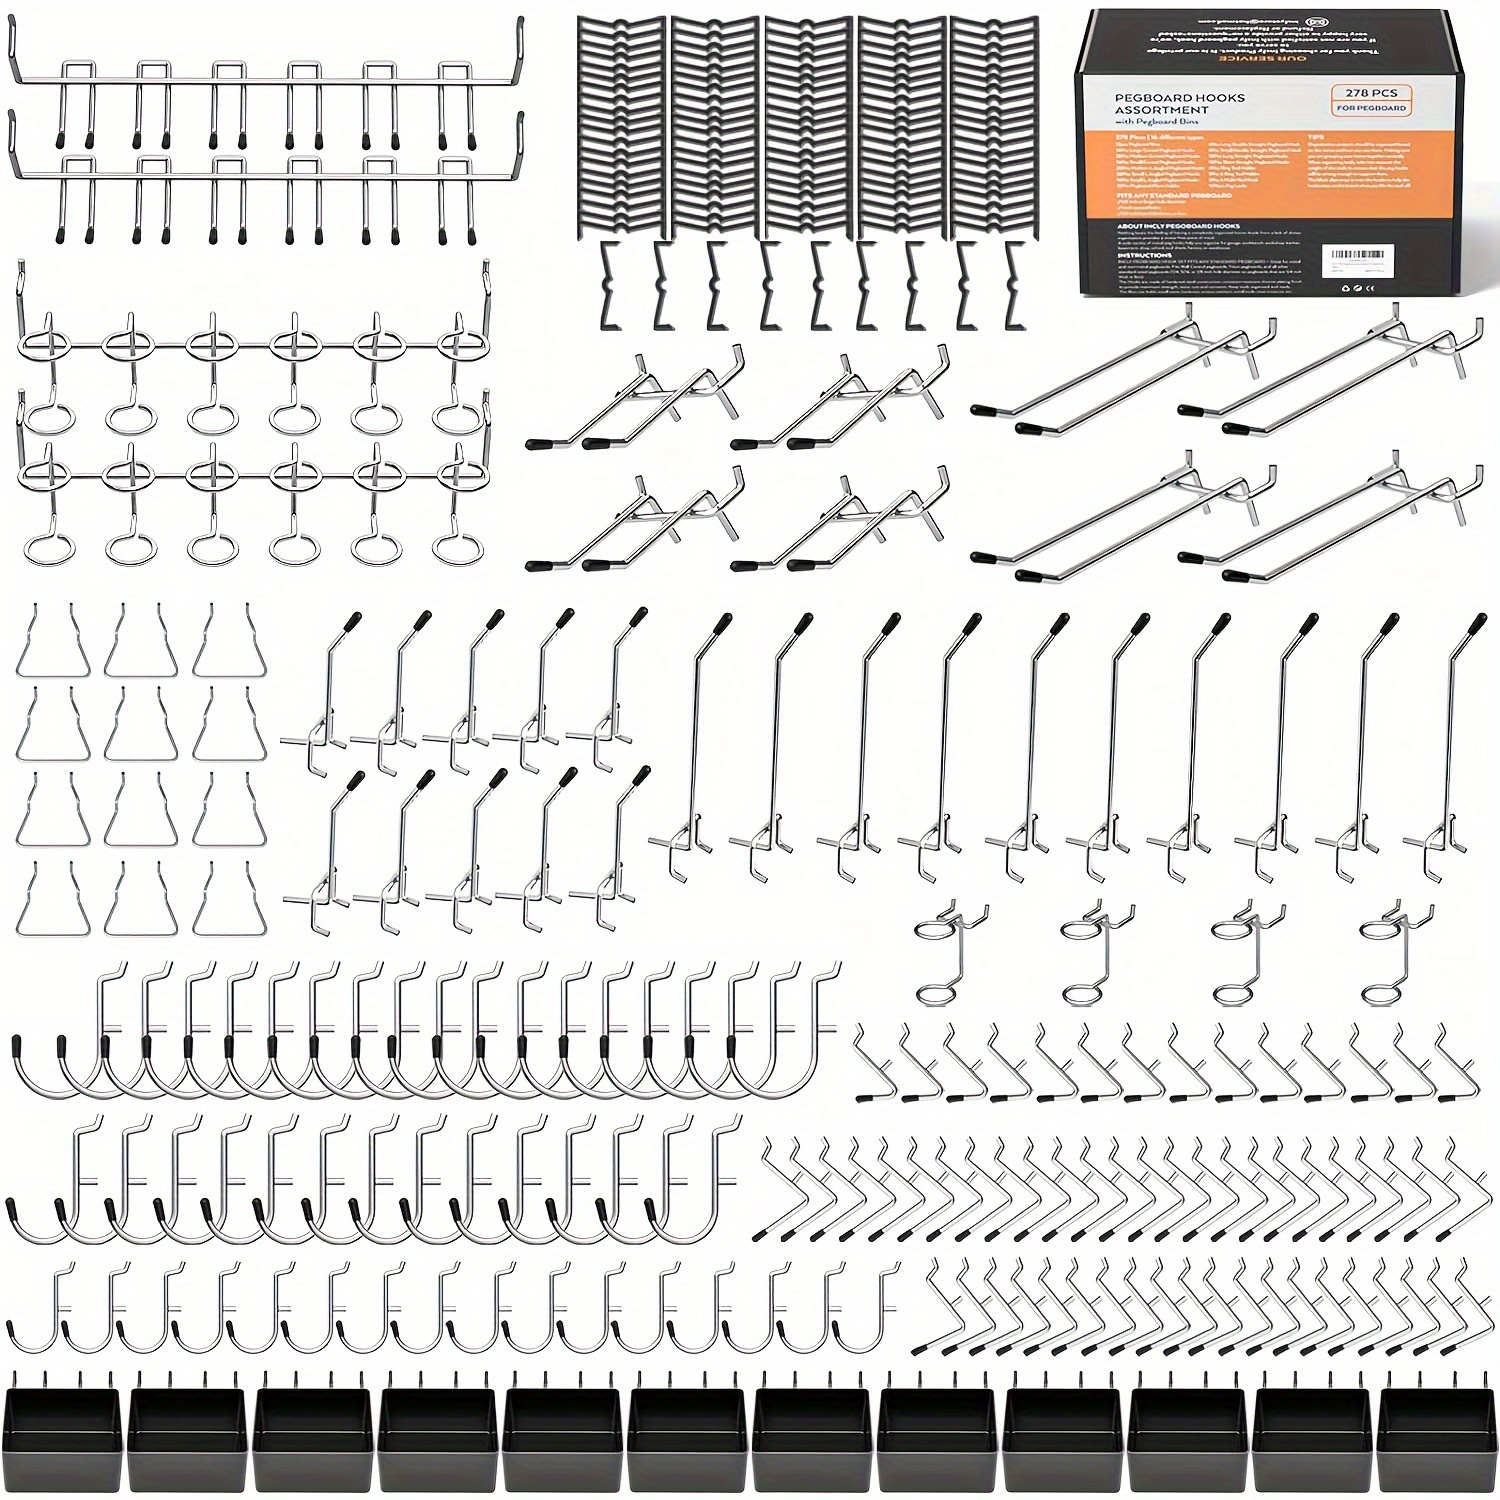 

278pcs Pegboard Accessories Organizer Kit, Peg Board Hooks Set With Bins For Organizing Various Tools, 1/8 And 1/4in Pegboard Hooks Assortment For Hanging Storage, Garage Wall Attachments